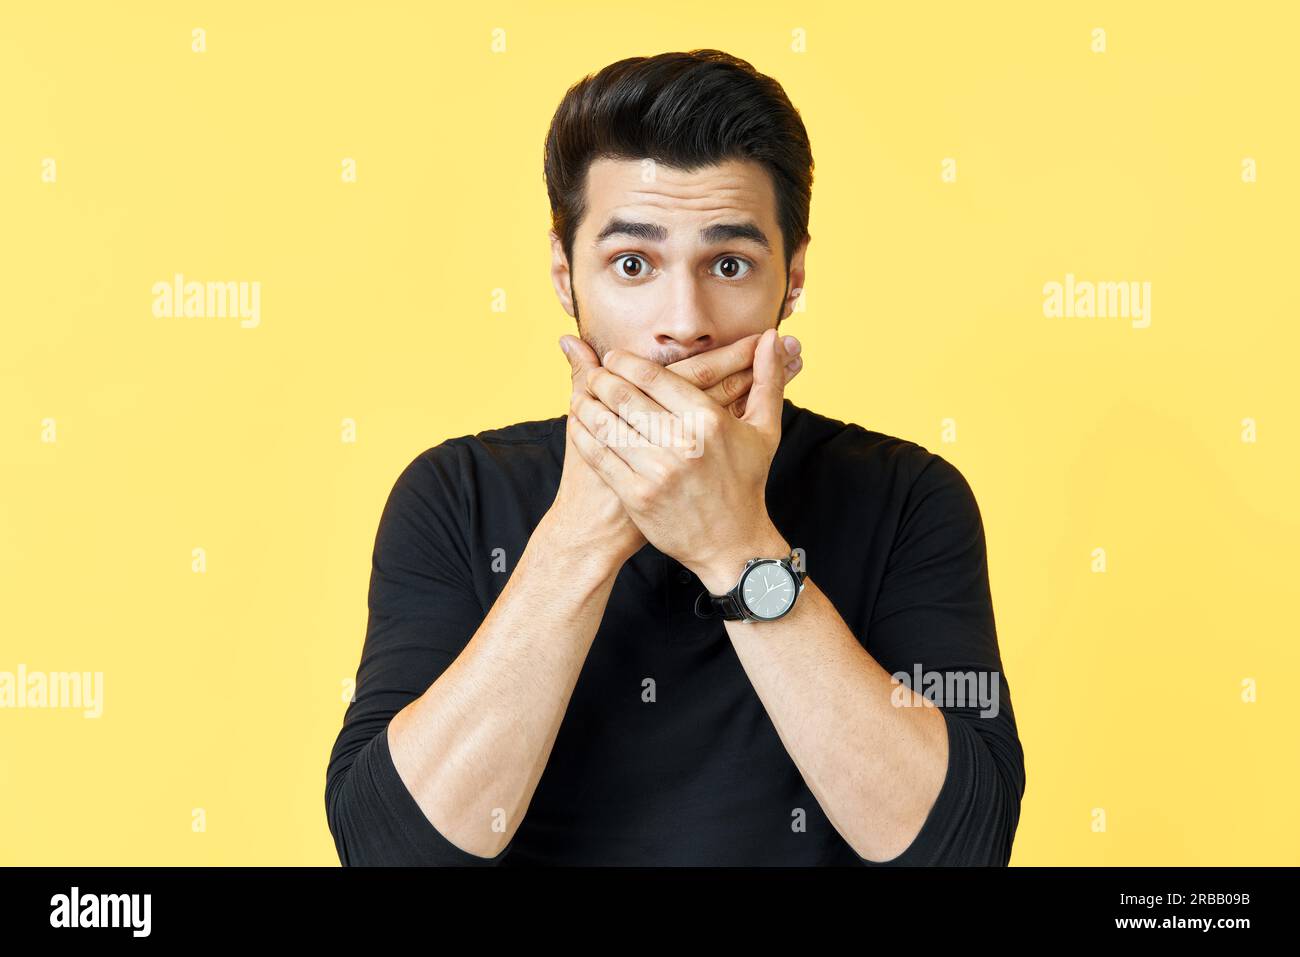 Shocked man covering mouth with hands over yellow background. emotions and secret concept Stock Photo